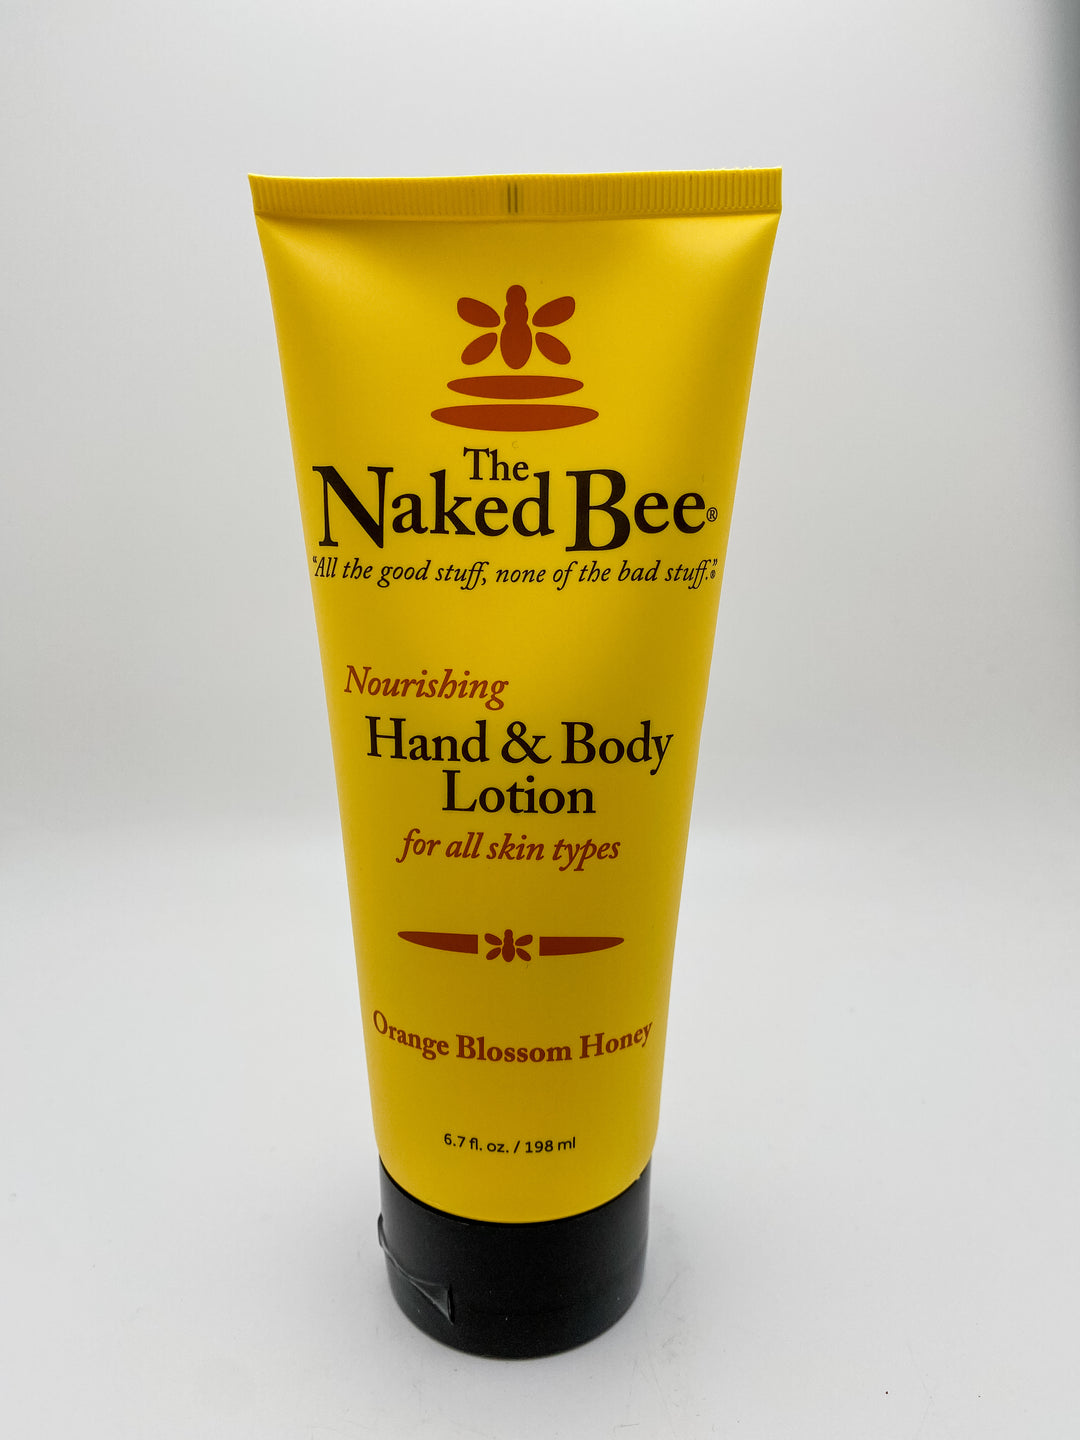 6.7oz Orange Blossom Honey Hand & Body Lotion by The Naked Bee